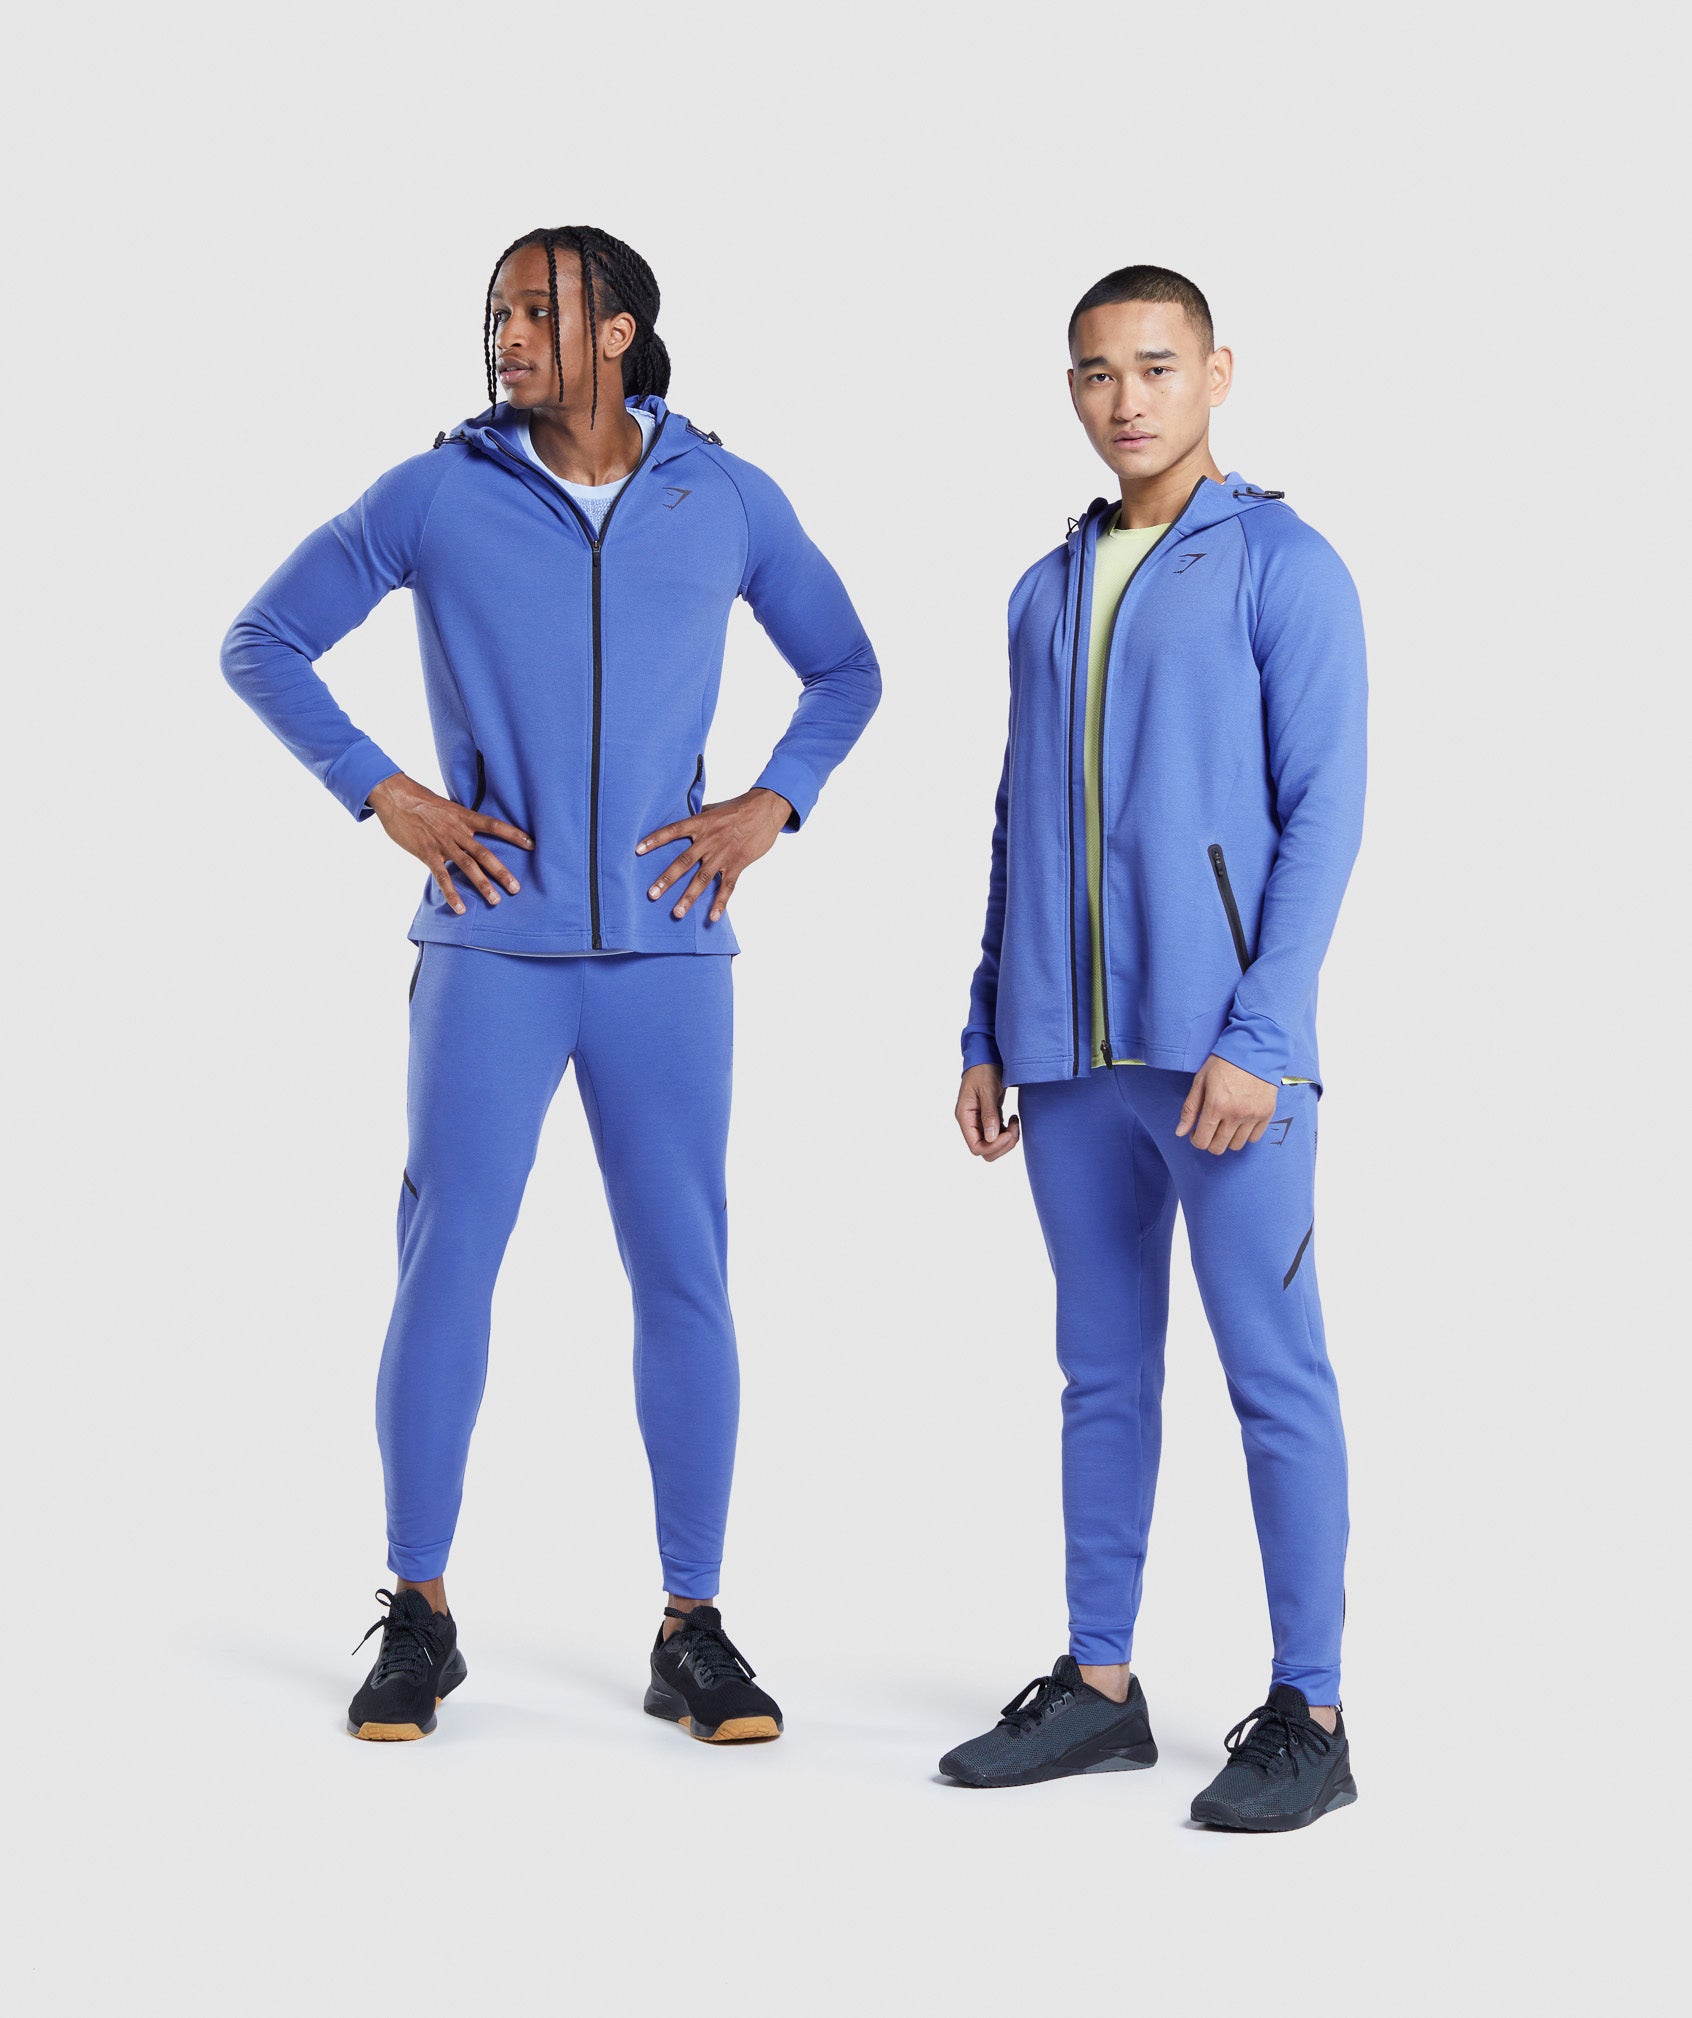 Apex Technical Jacket in Court Blue - view 4